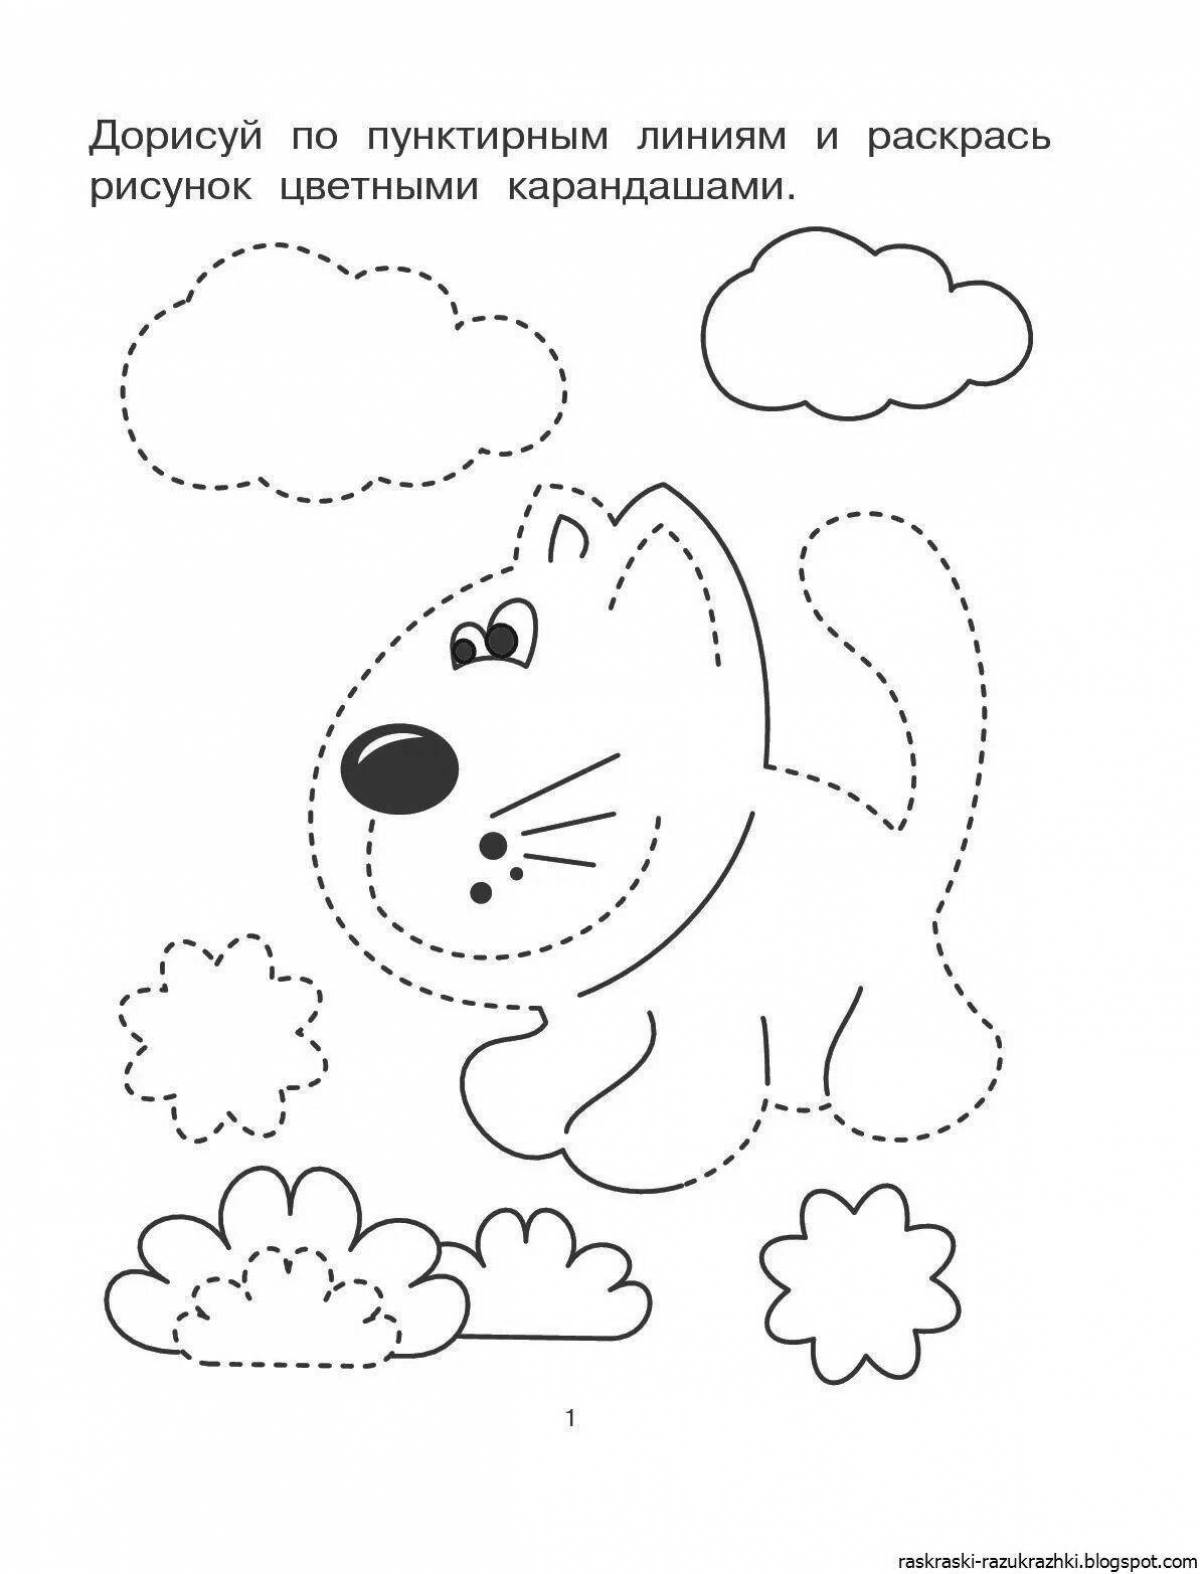 Fun coloring assignments for 3-4 year olds